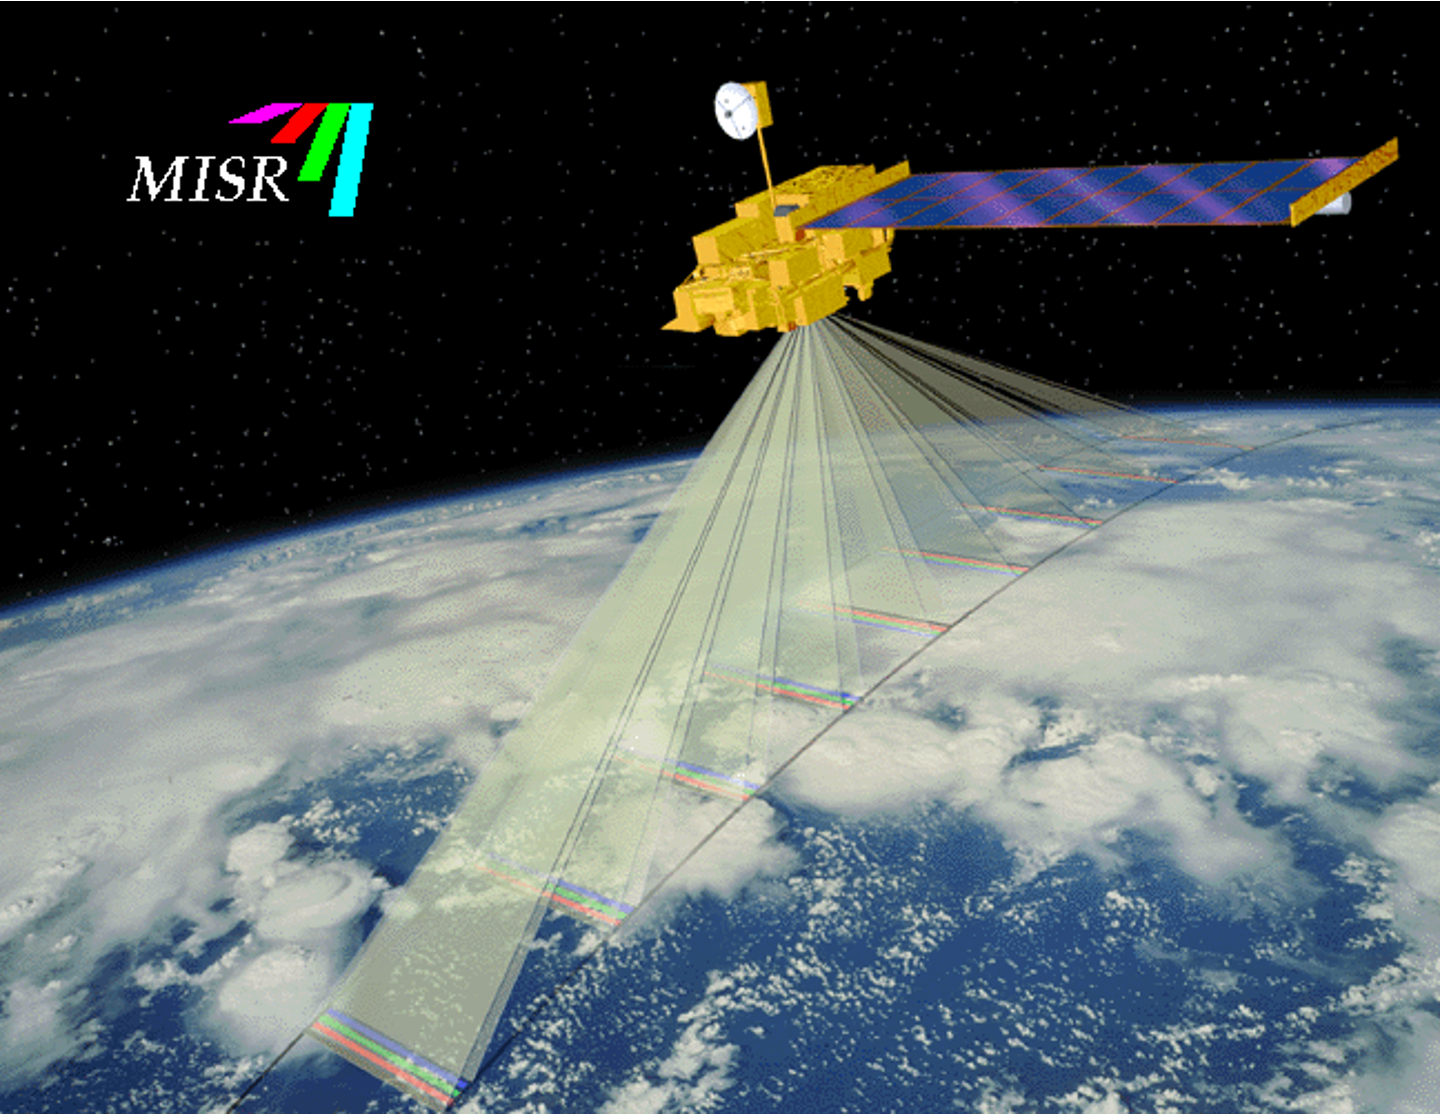 A schematic of MISR as it passes over Earth in its orbit. The field of vision for MISR's nine cameras are shown.